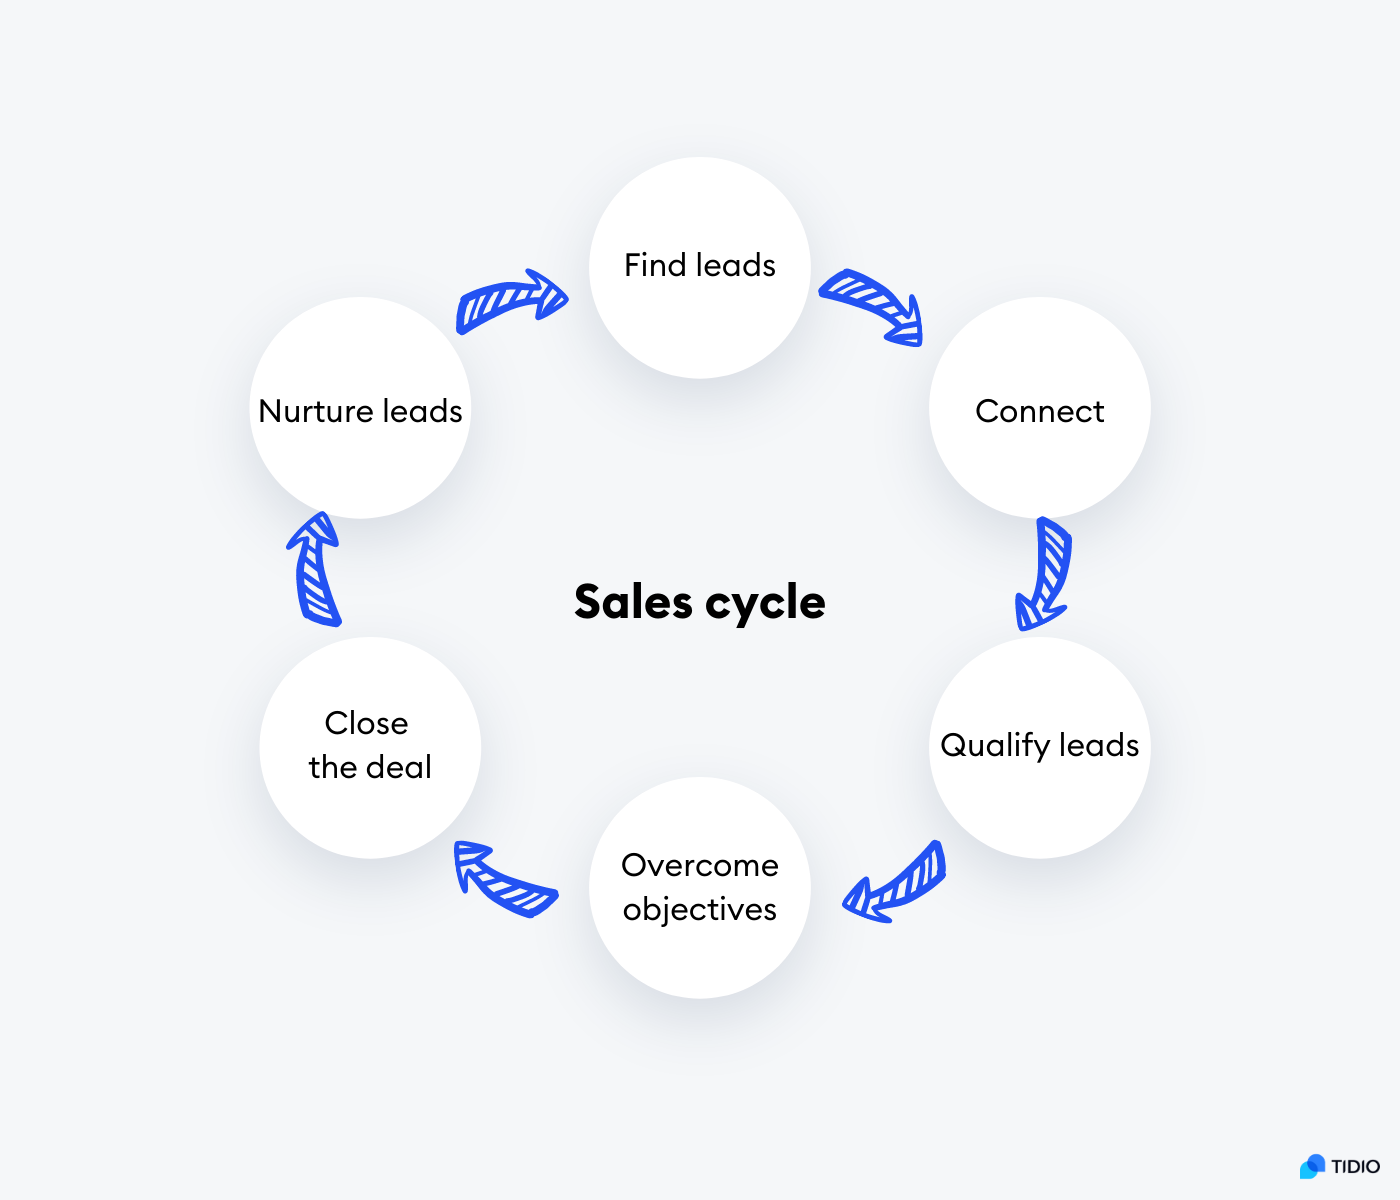 sales cycle on image